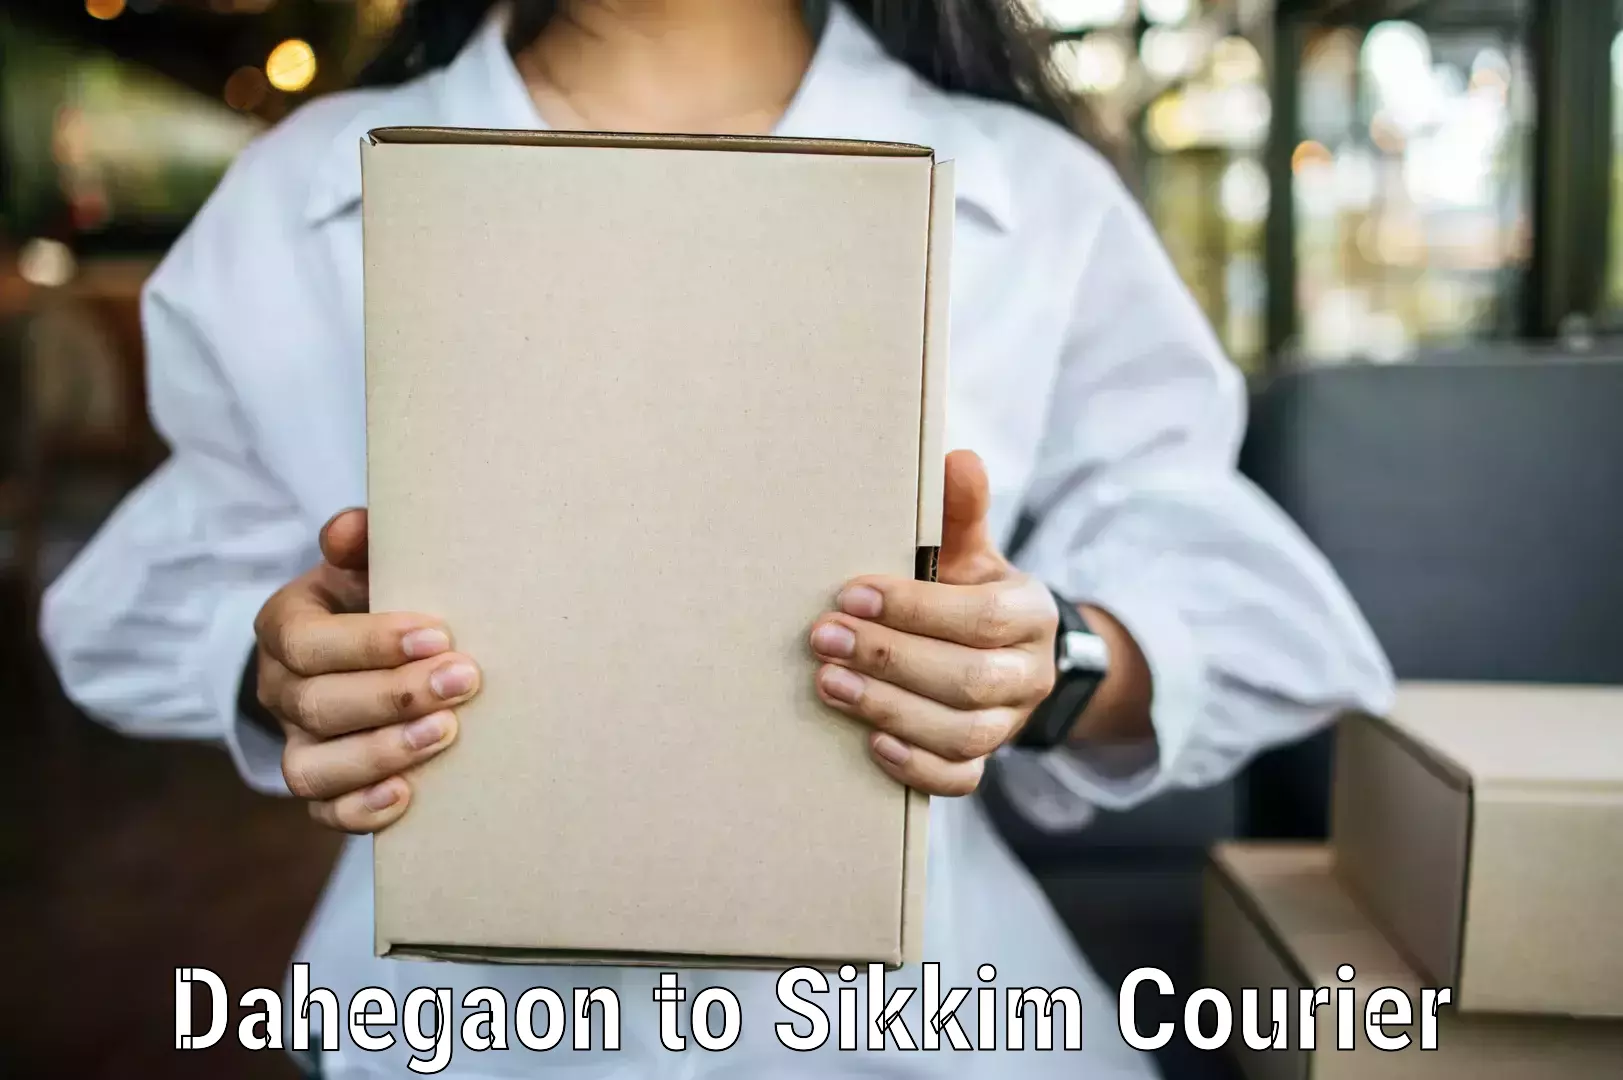 Global shipping solutions Dahegaon to Sikkim